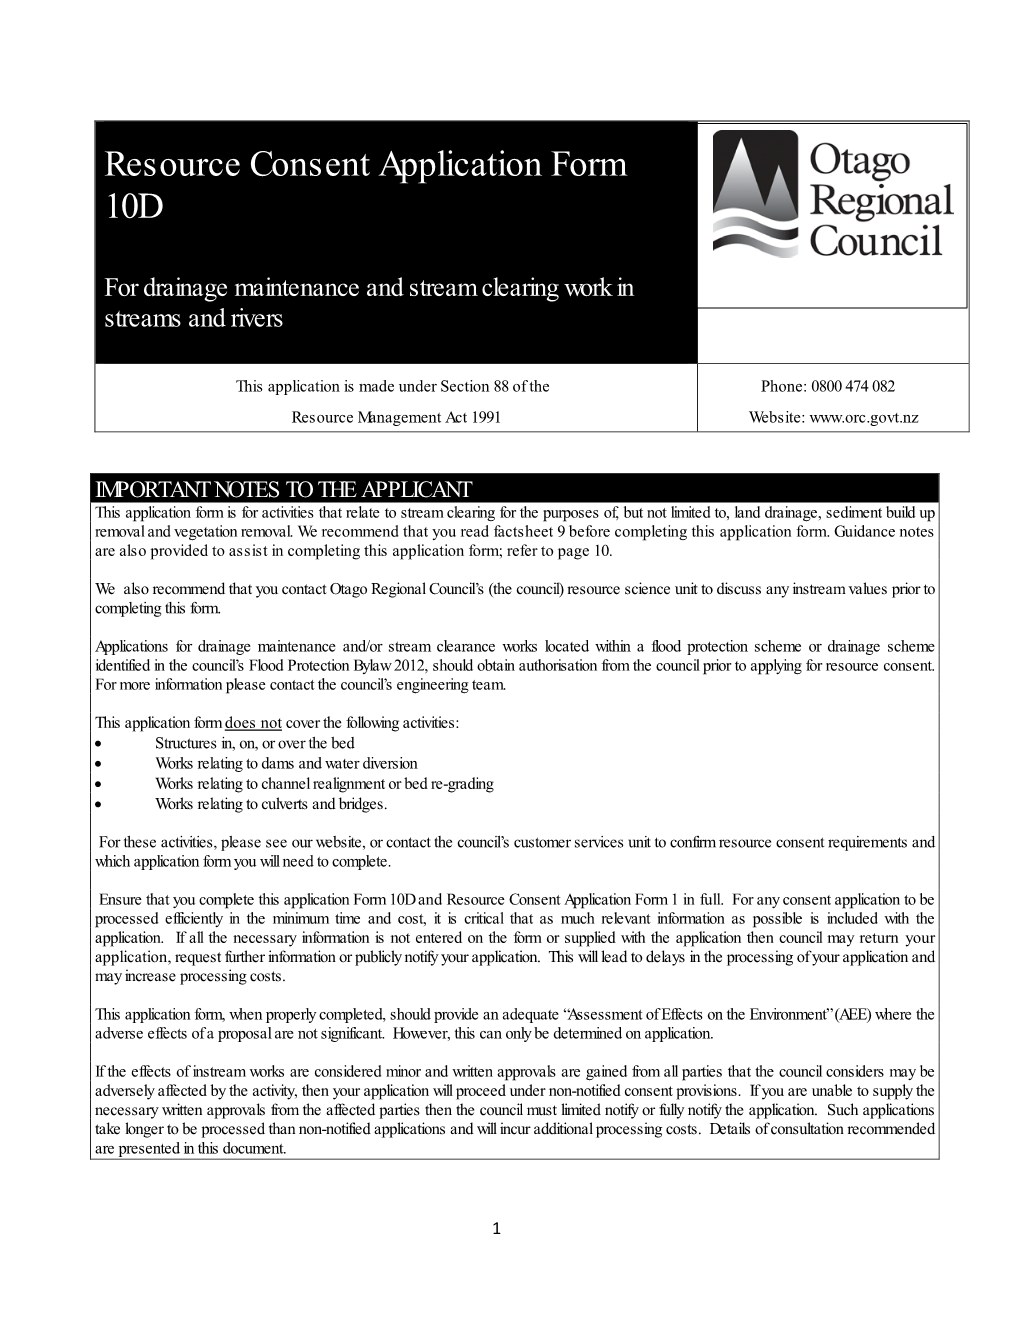 Resource Consent Application Form 10D